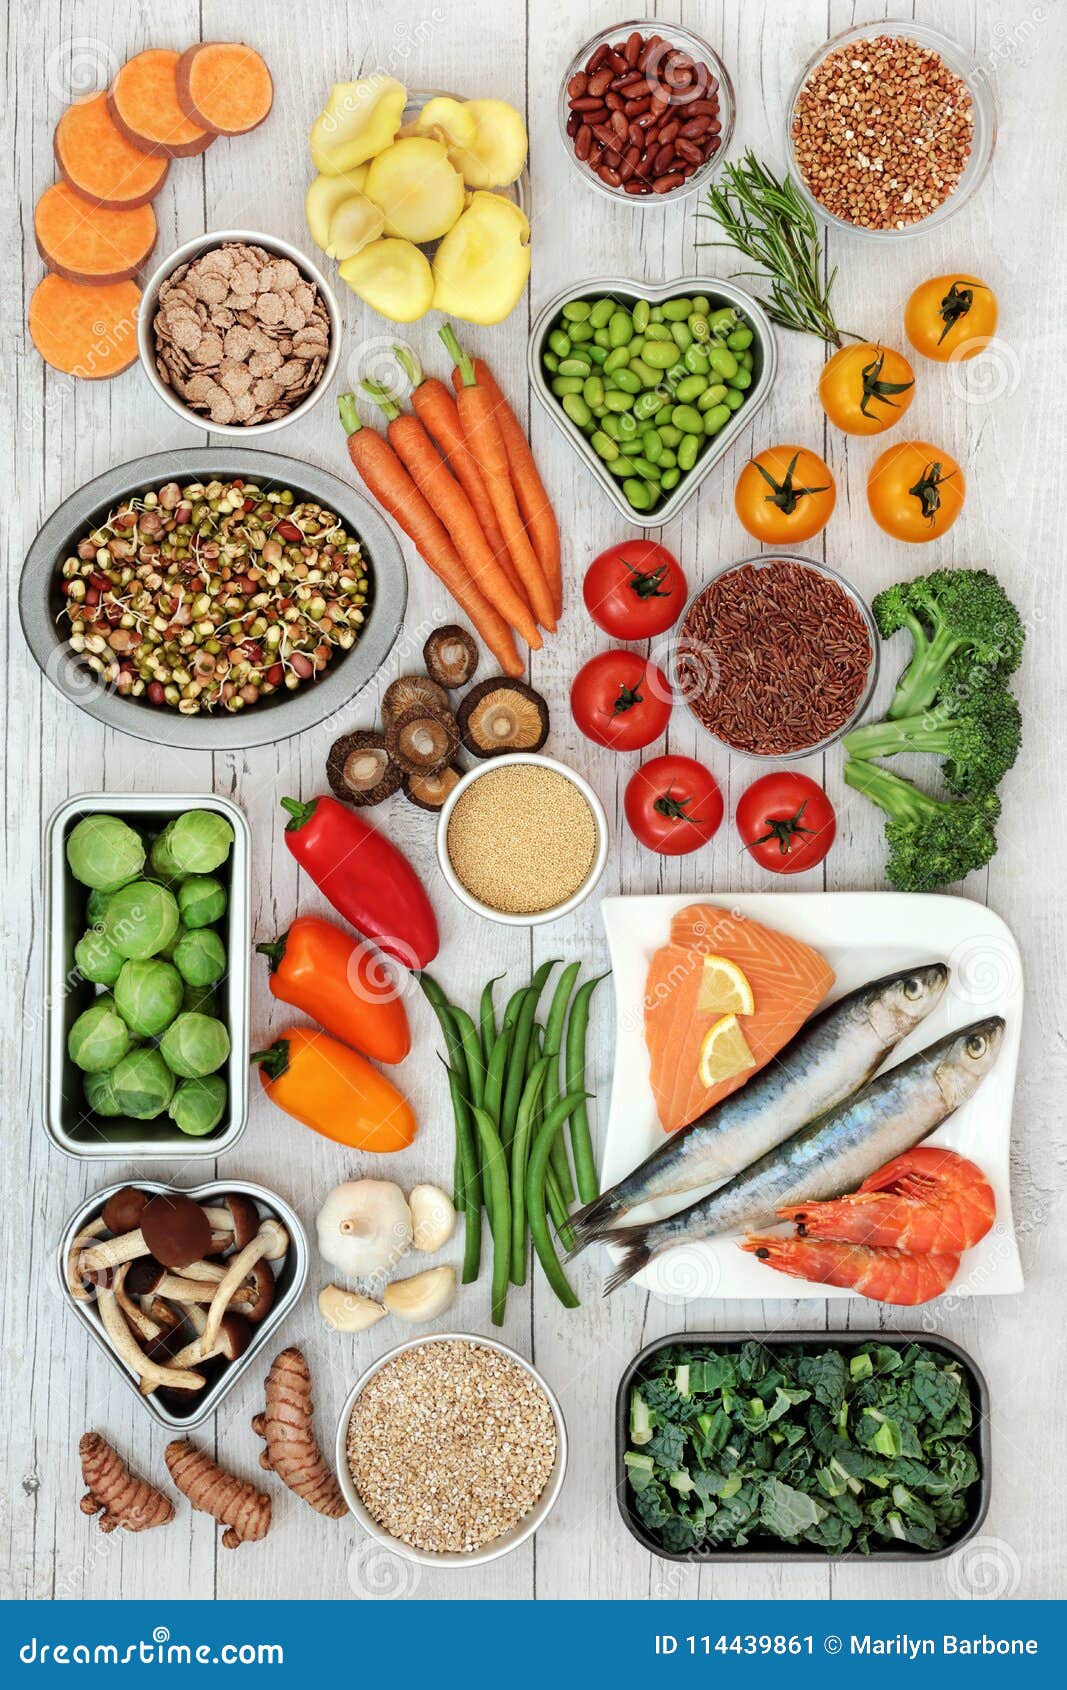 Super Food For A Healthy Lifestyle Stock Image Image Of Fresh